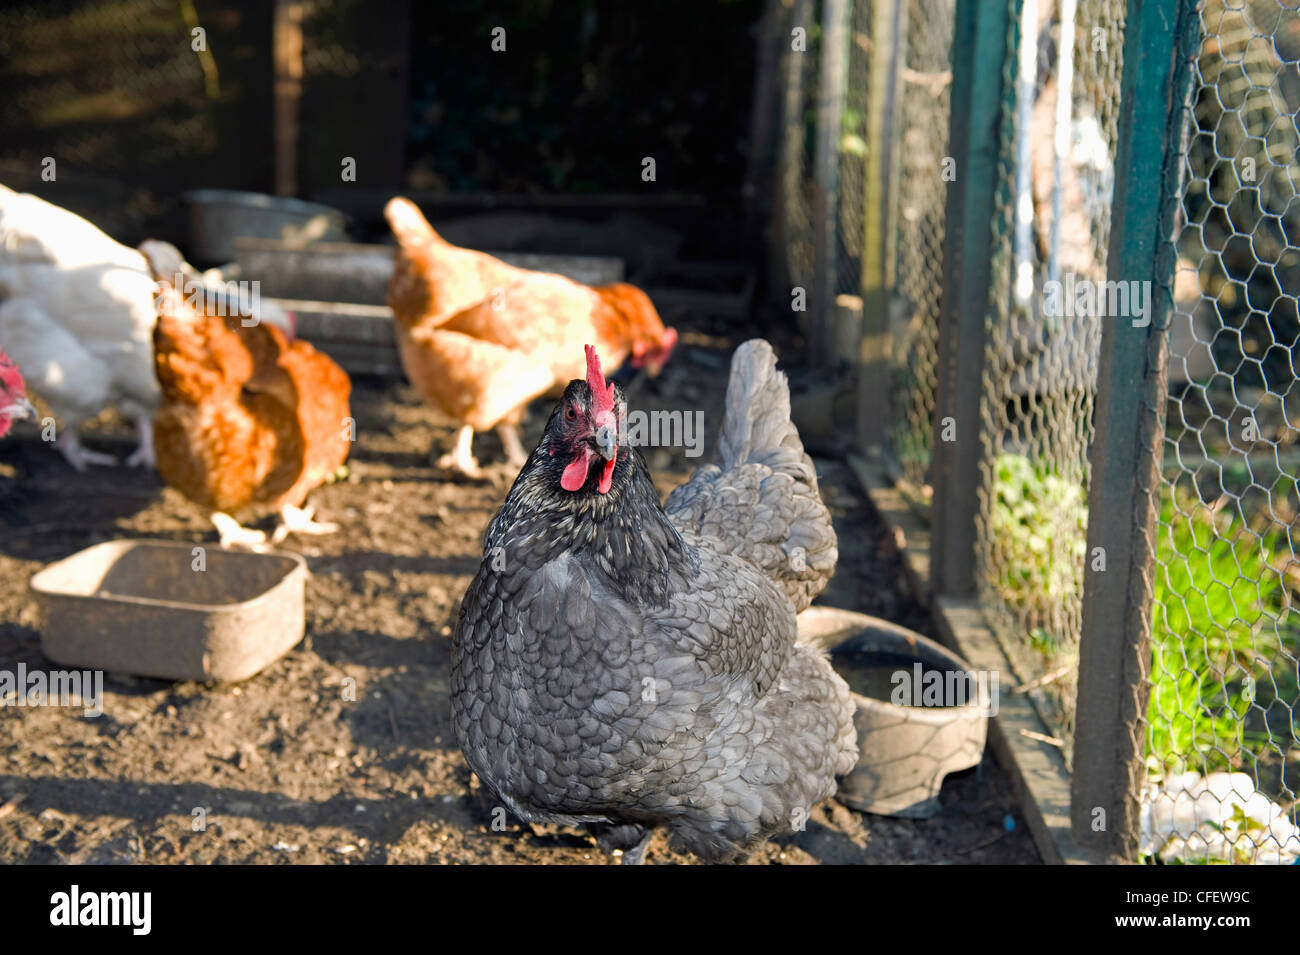 A Maran chicken in a coop. Stock Photo